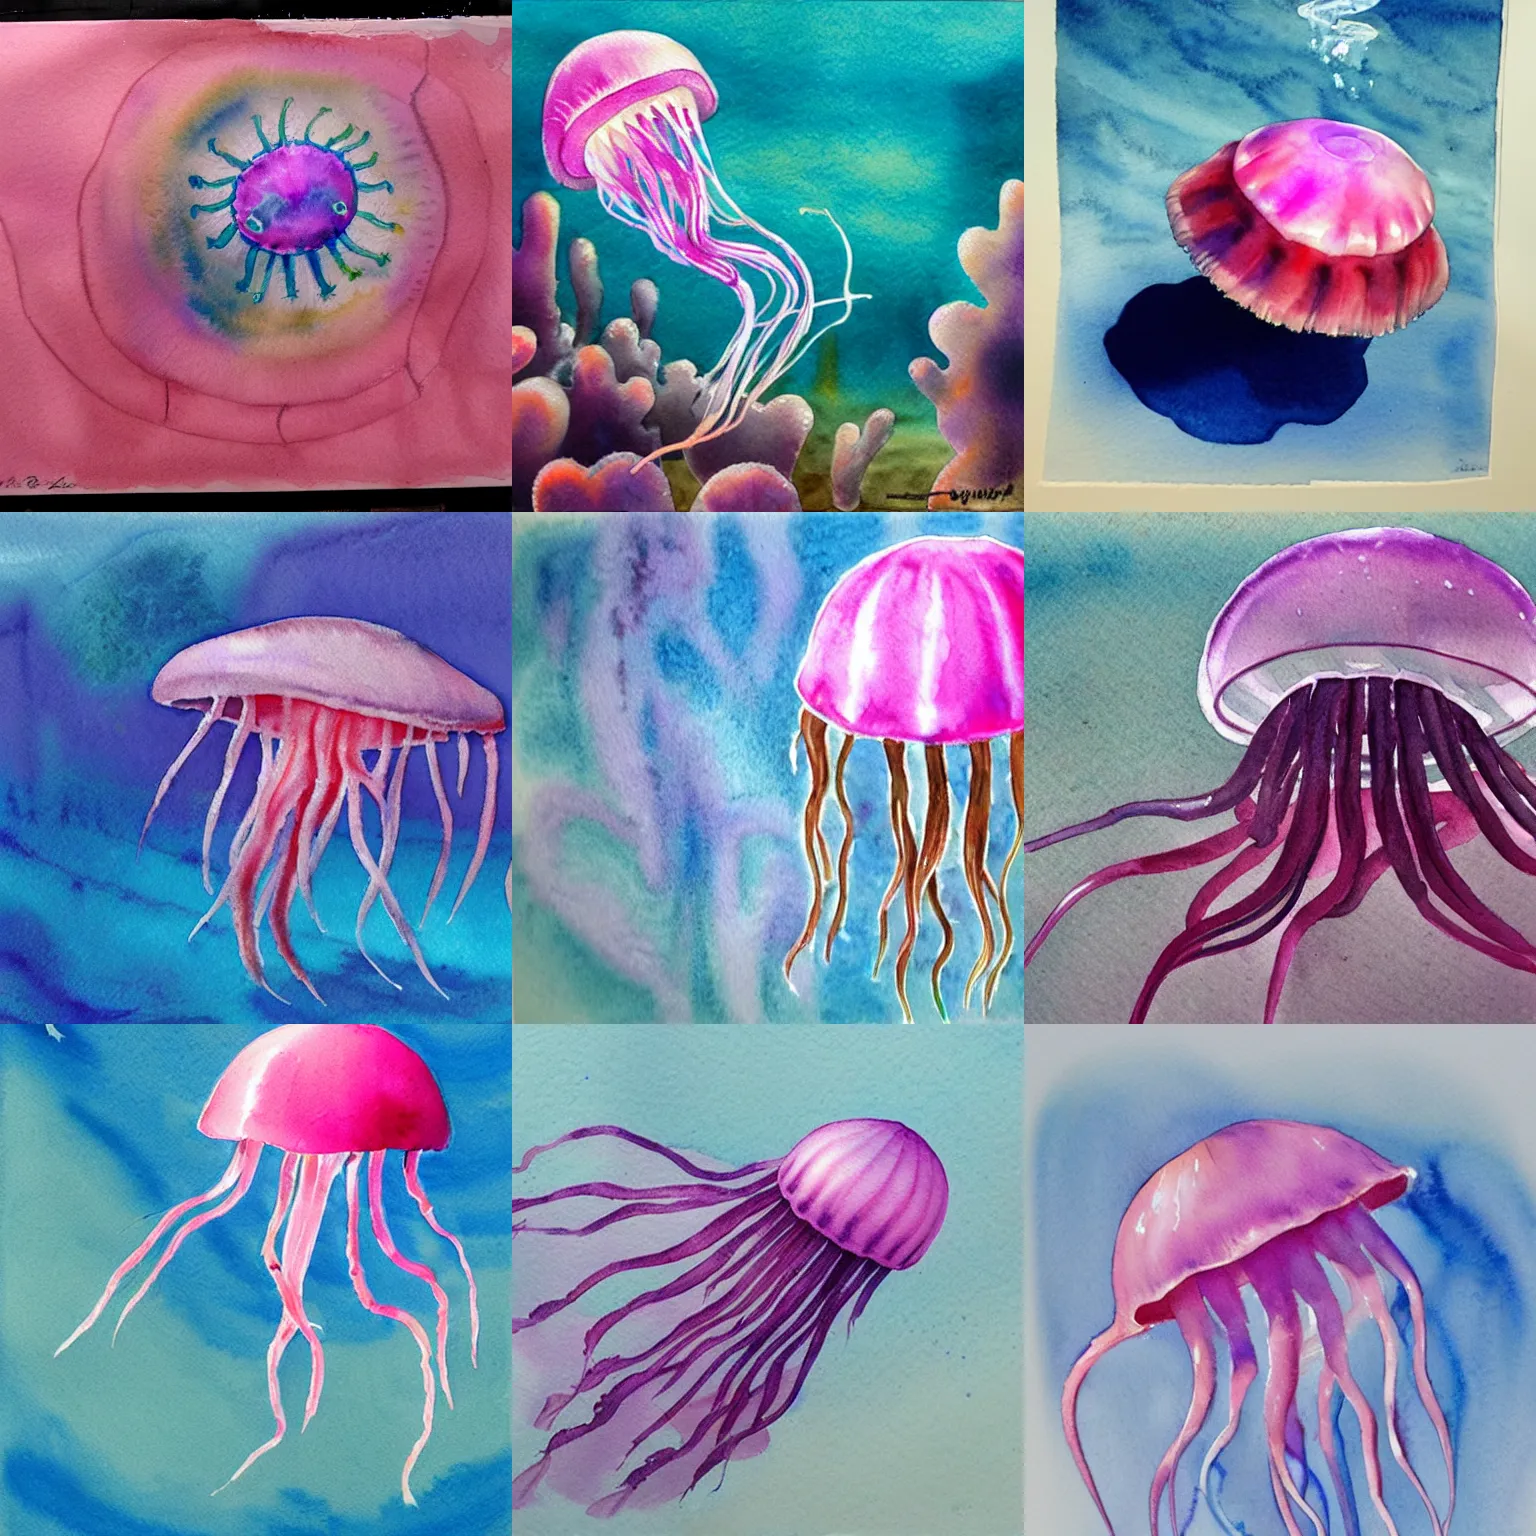 Prompt: a realist watercolor painting of a pink jellyfish underwater, in the style of joseph zbukvic